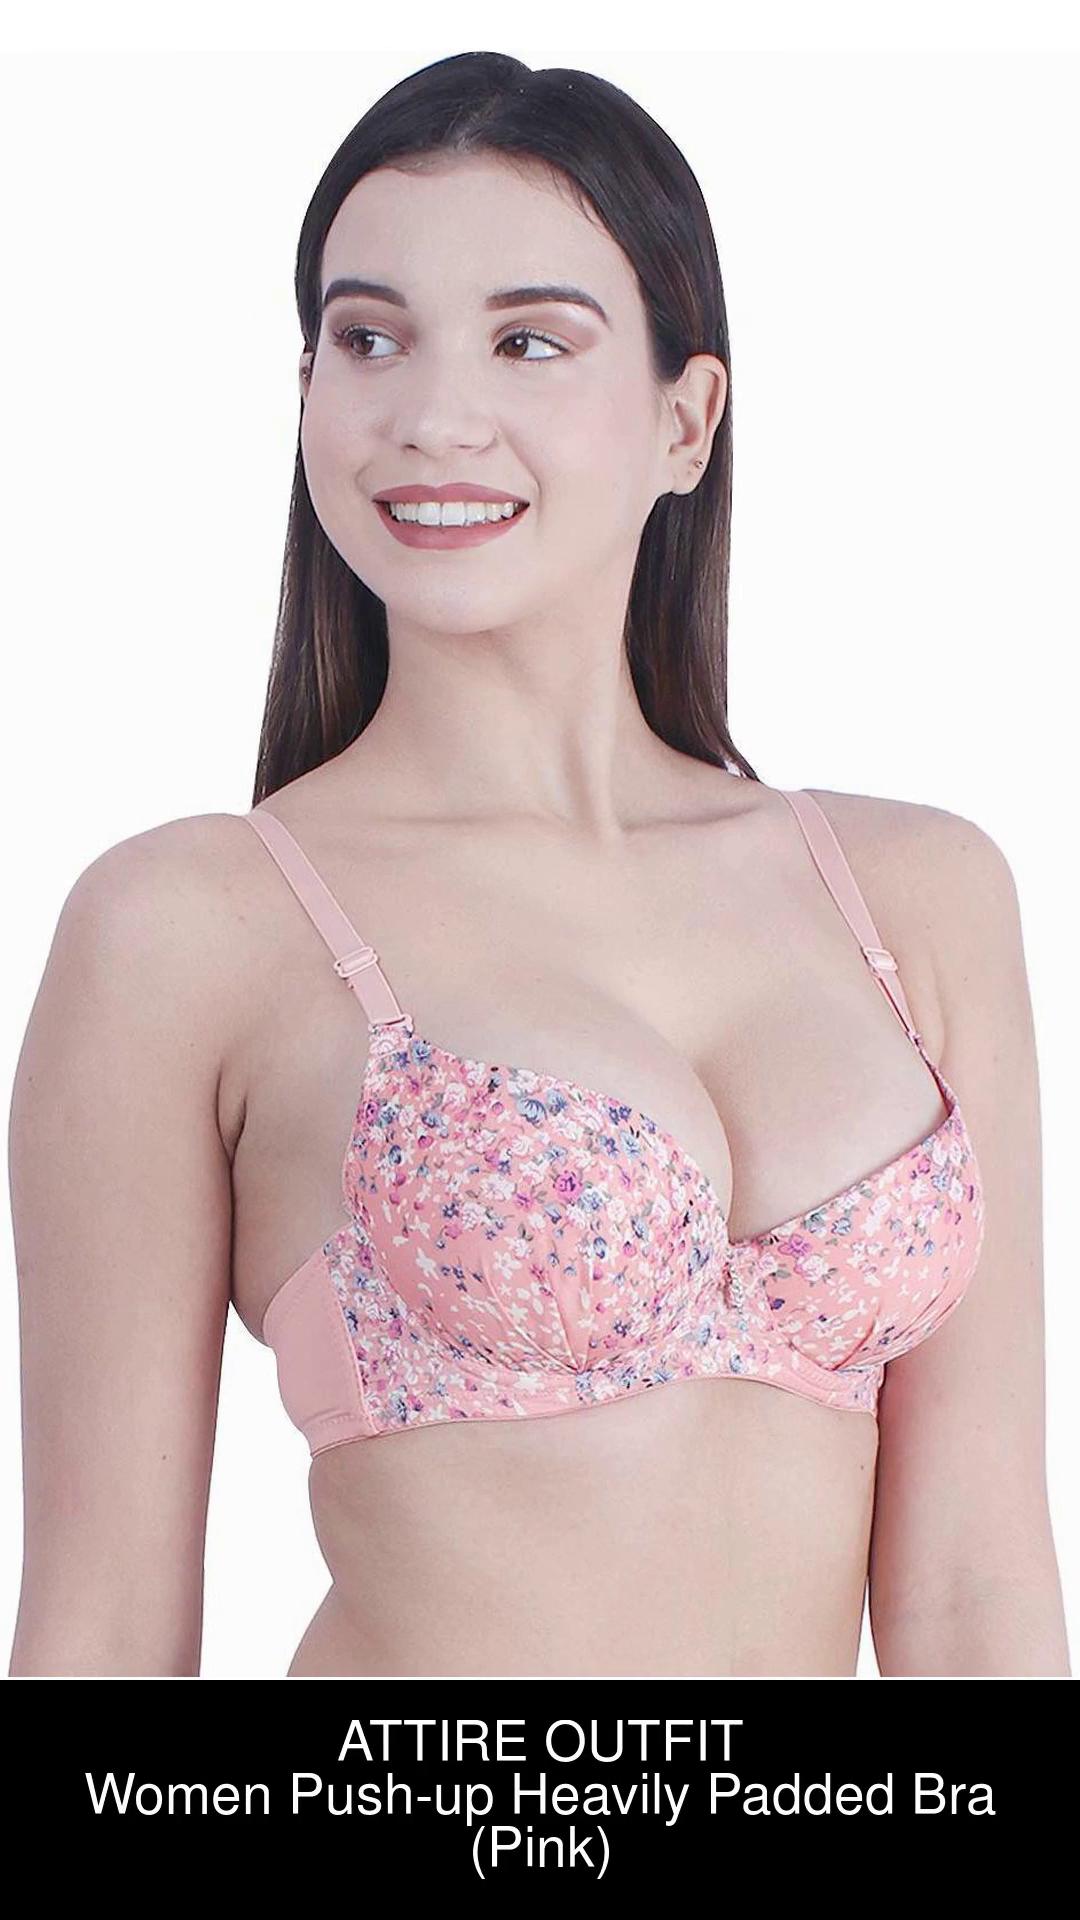 ATTIRE OUTFIT Women Push-up Heavily Padded Bra - Buy ATTIRE OUTFIT